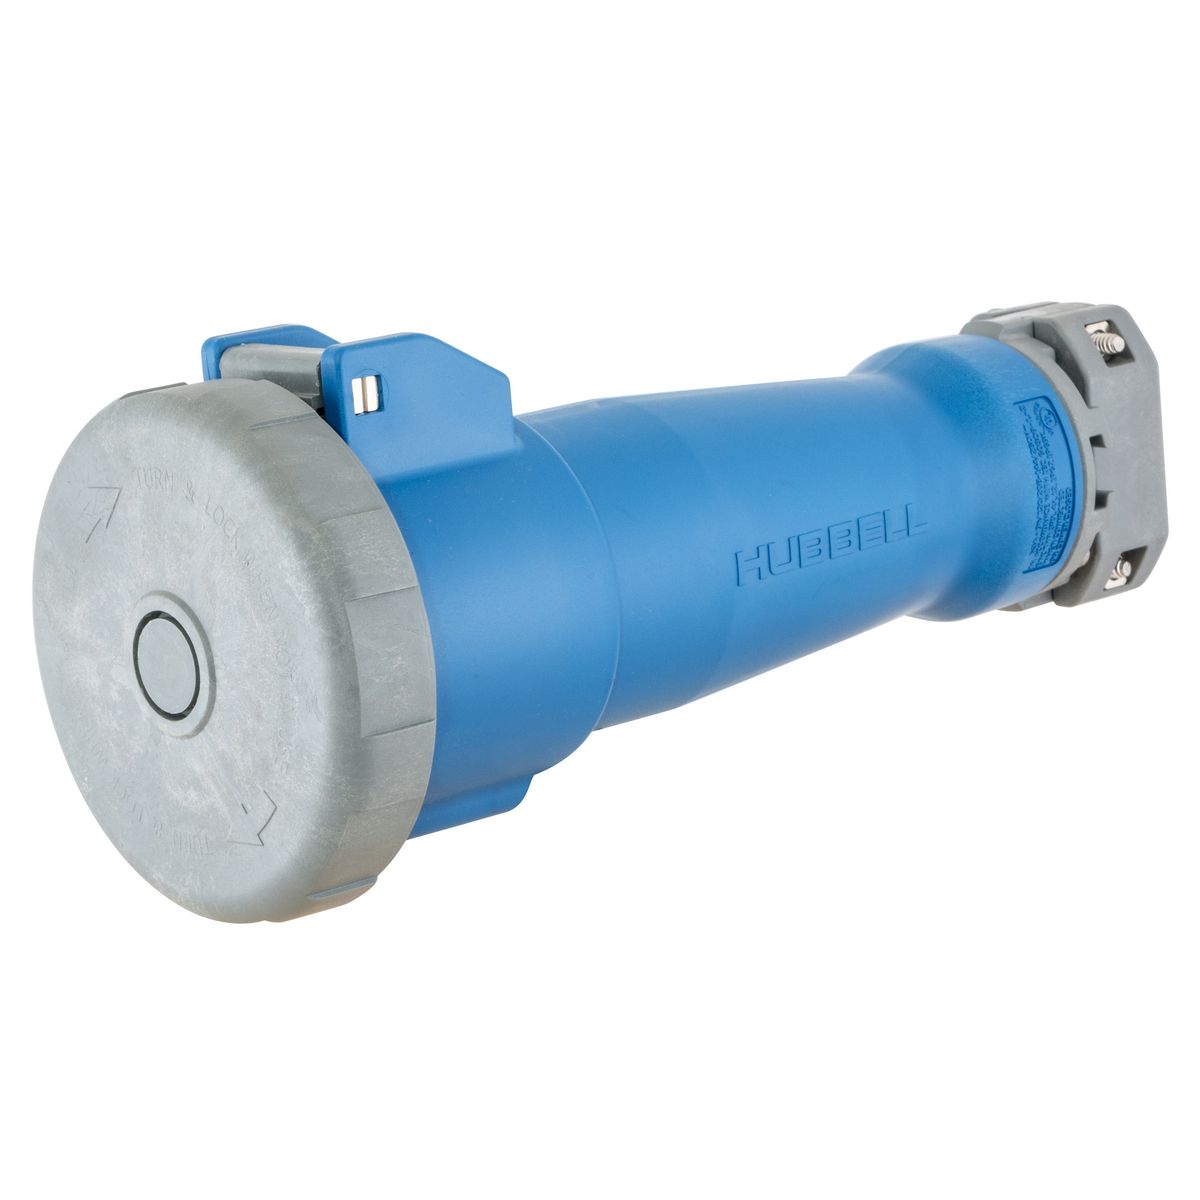 MENNEKES 60a 3 Phase 250vac Pin and Sleeve Watertight Plug Blue Me 460p9w for sale online 